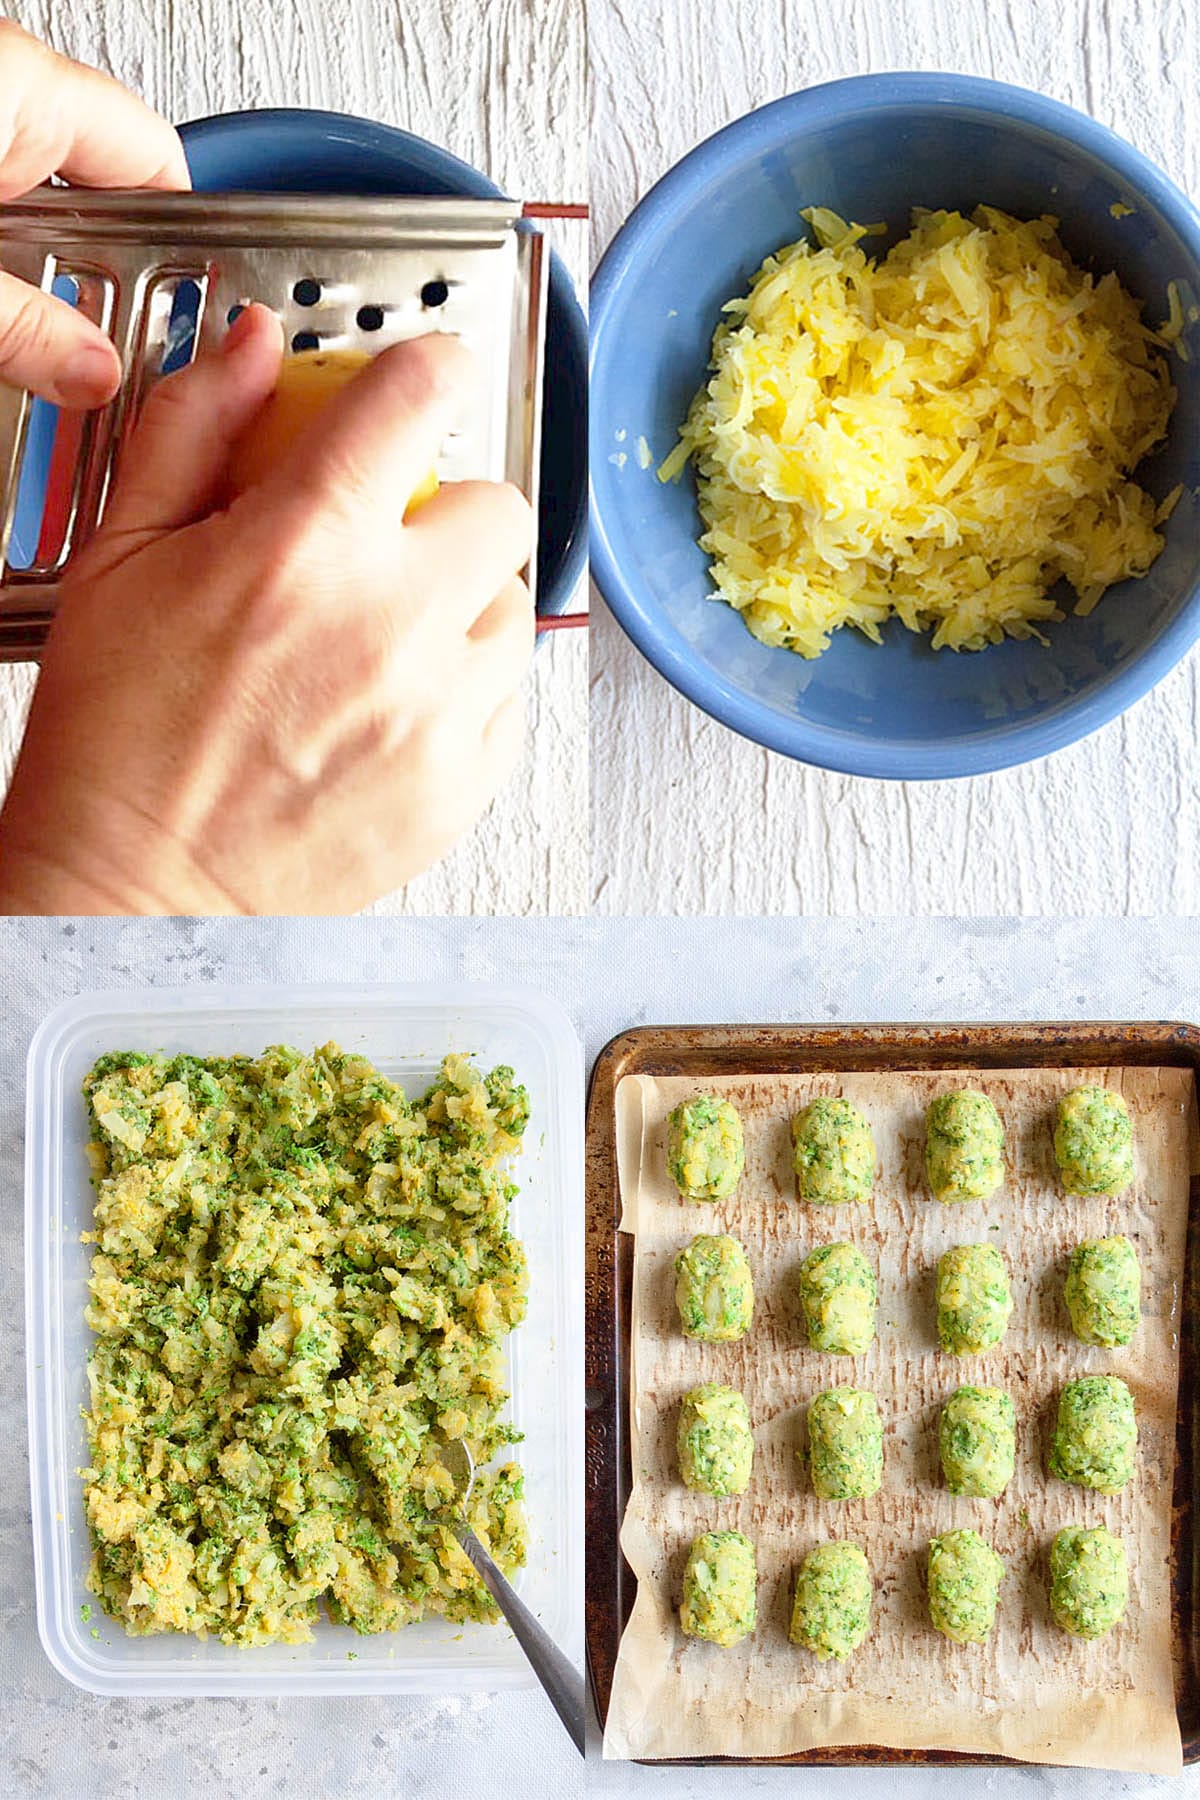 Photos showing process of broccoli tots being made.